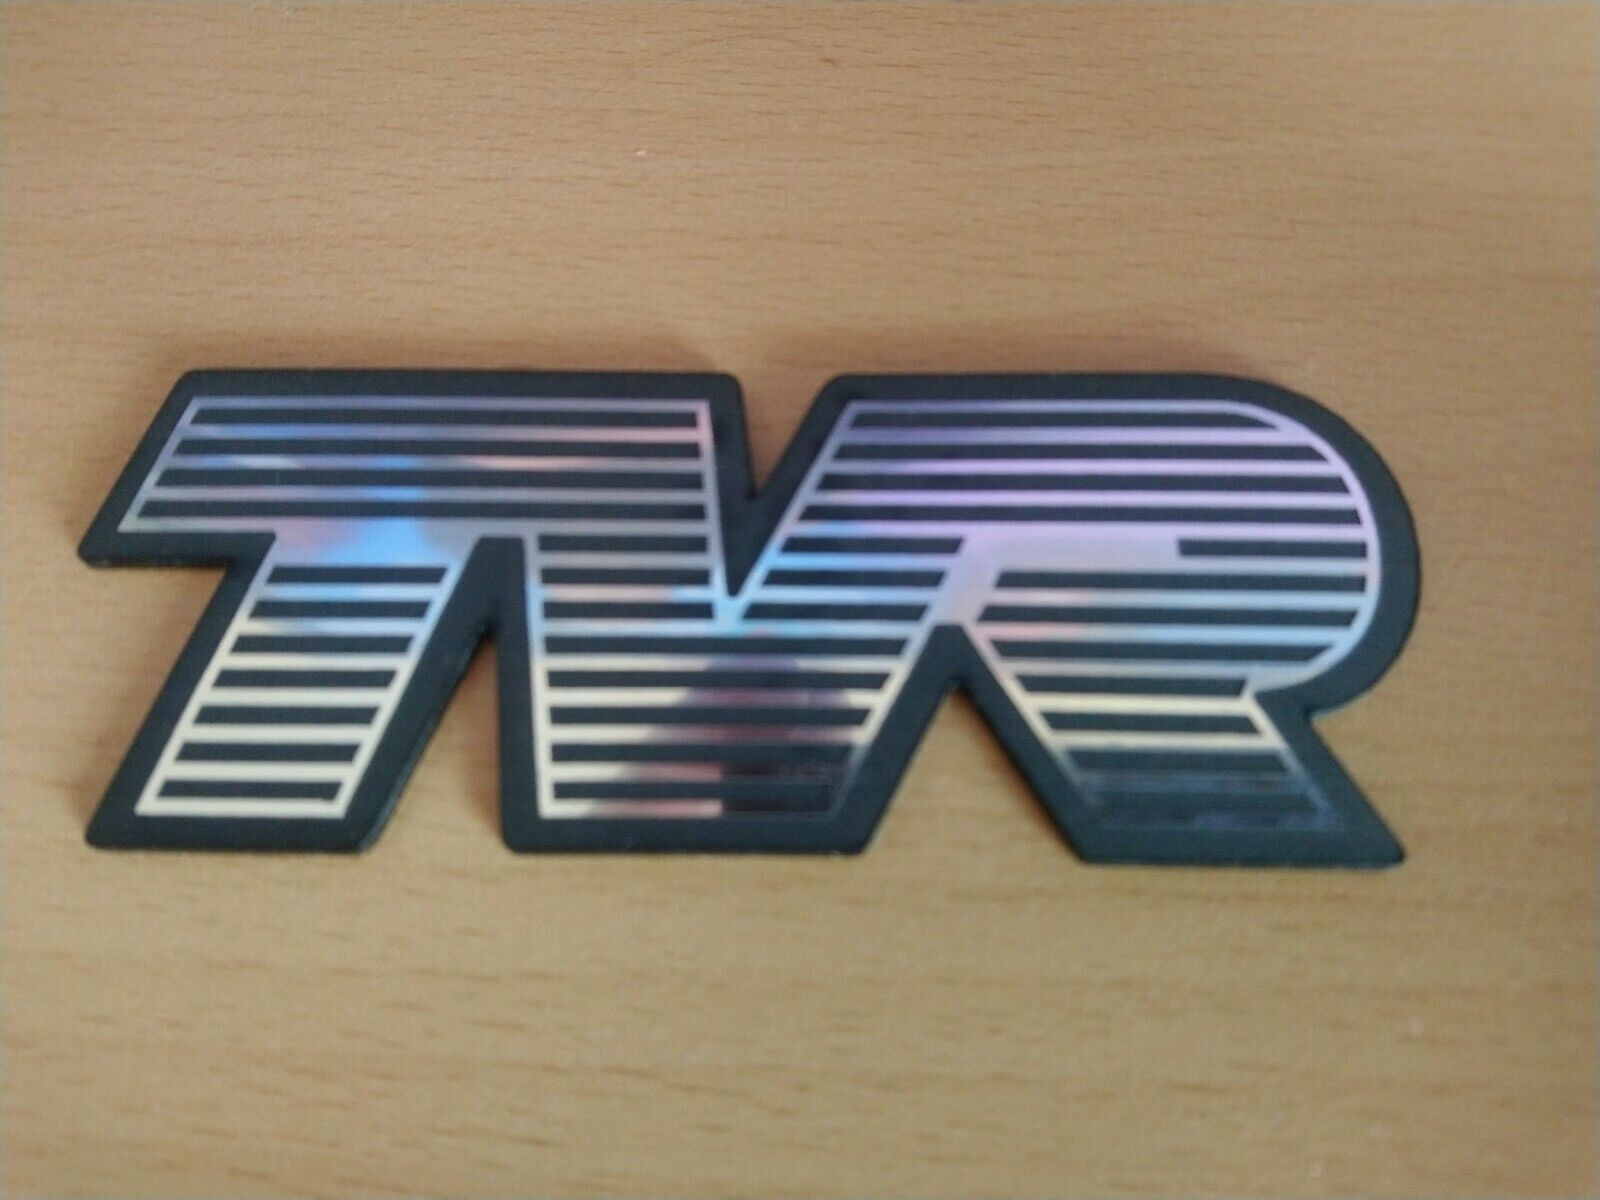 TVR Chimaera Replacement Bonnet Badge toolbox garage or mancave